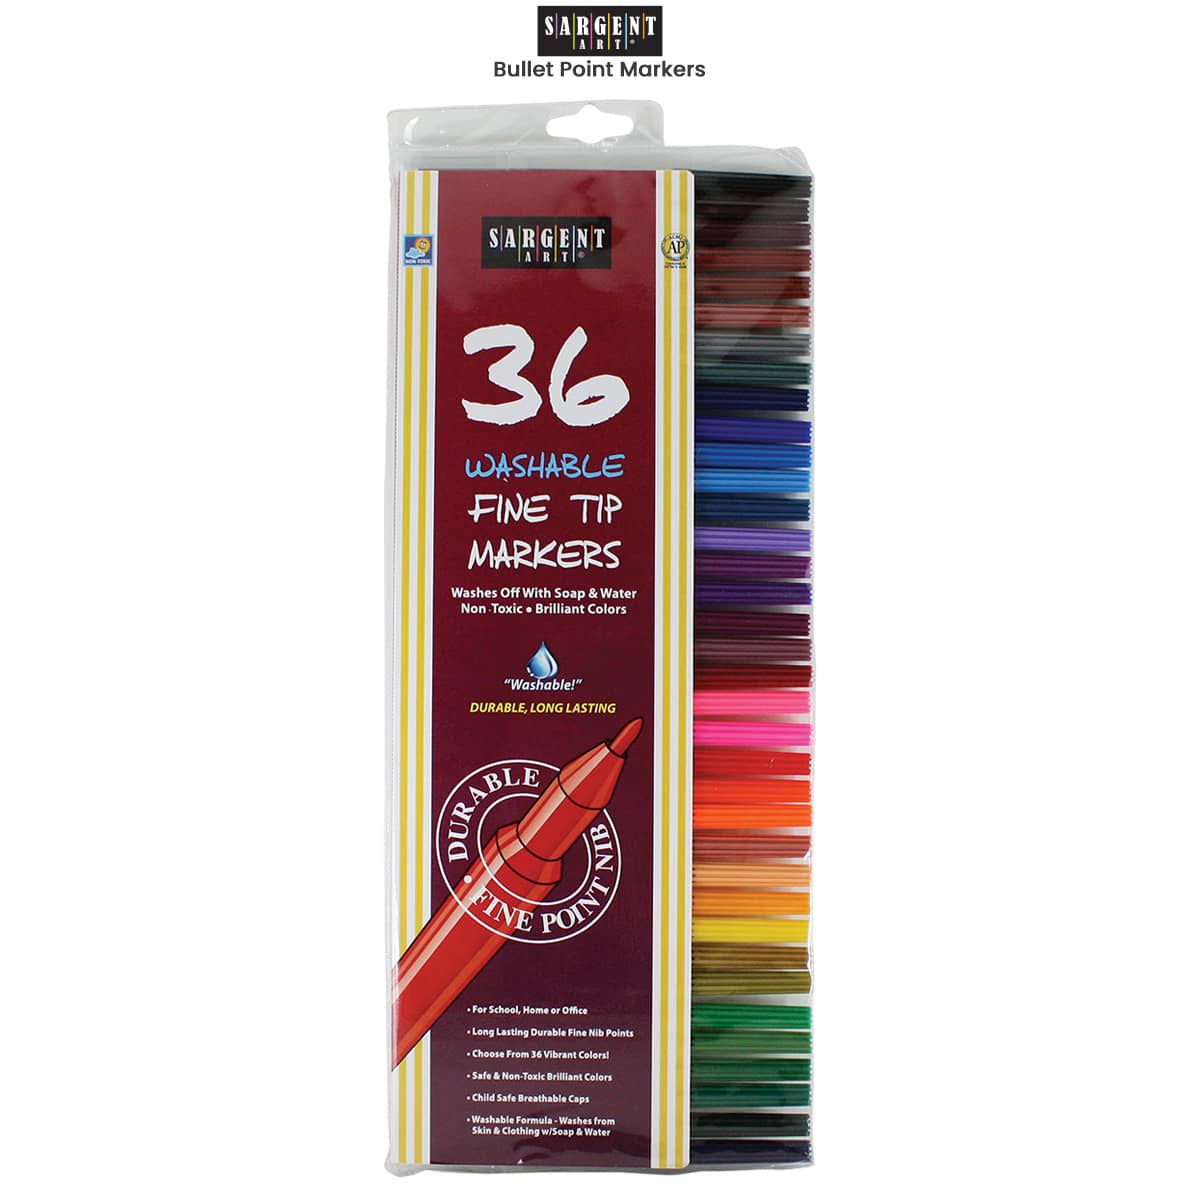 Crafts 4 All Fabric Markers for Kids & Adults - 36 Dual Tip, Water-Based,  Permanent Fabric Marker Pens w/Minimal Bleed for Decorating Canvas, T  Shirts and Other Clothes - Machine Washable, Non-Toxic